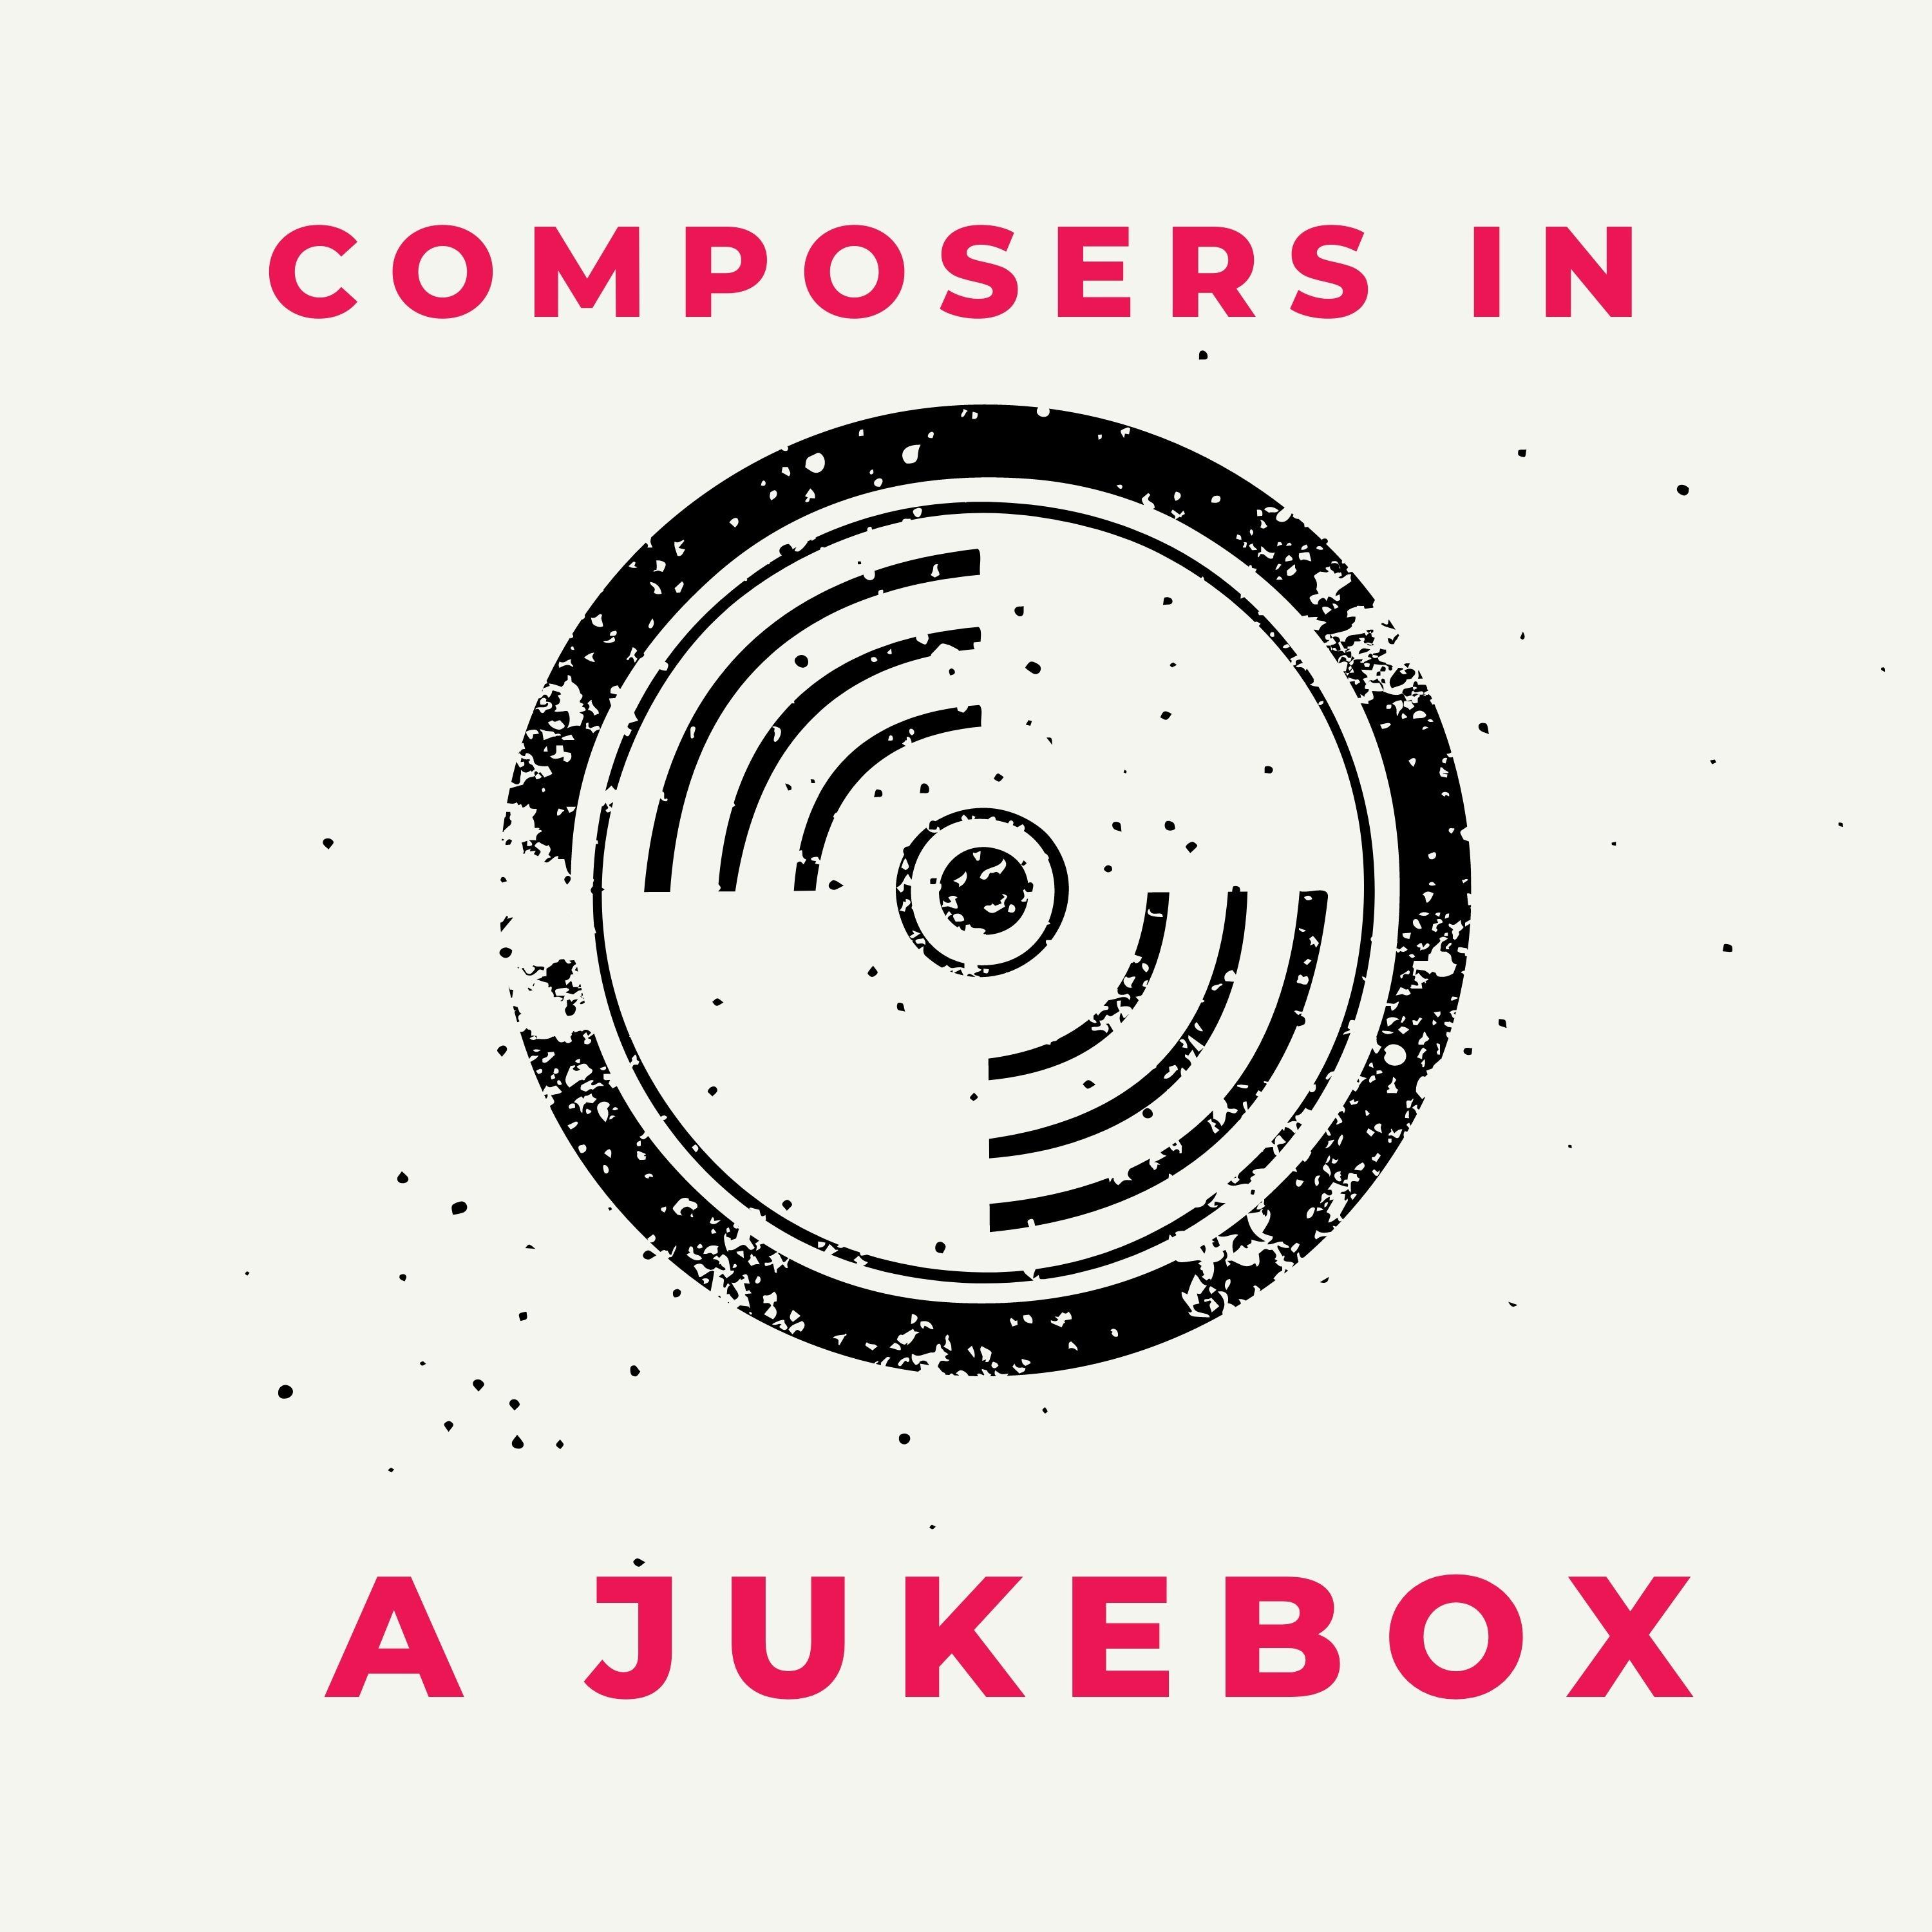 Composers in a Jukebox